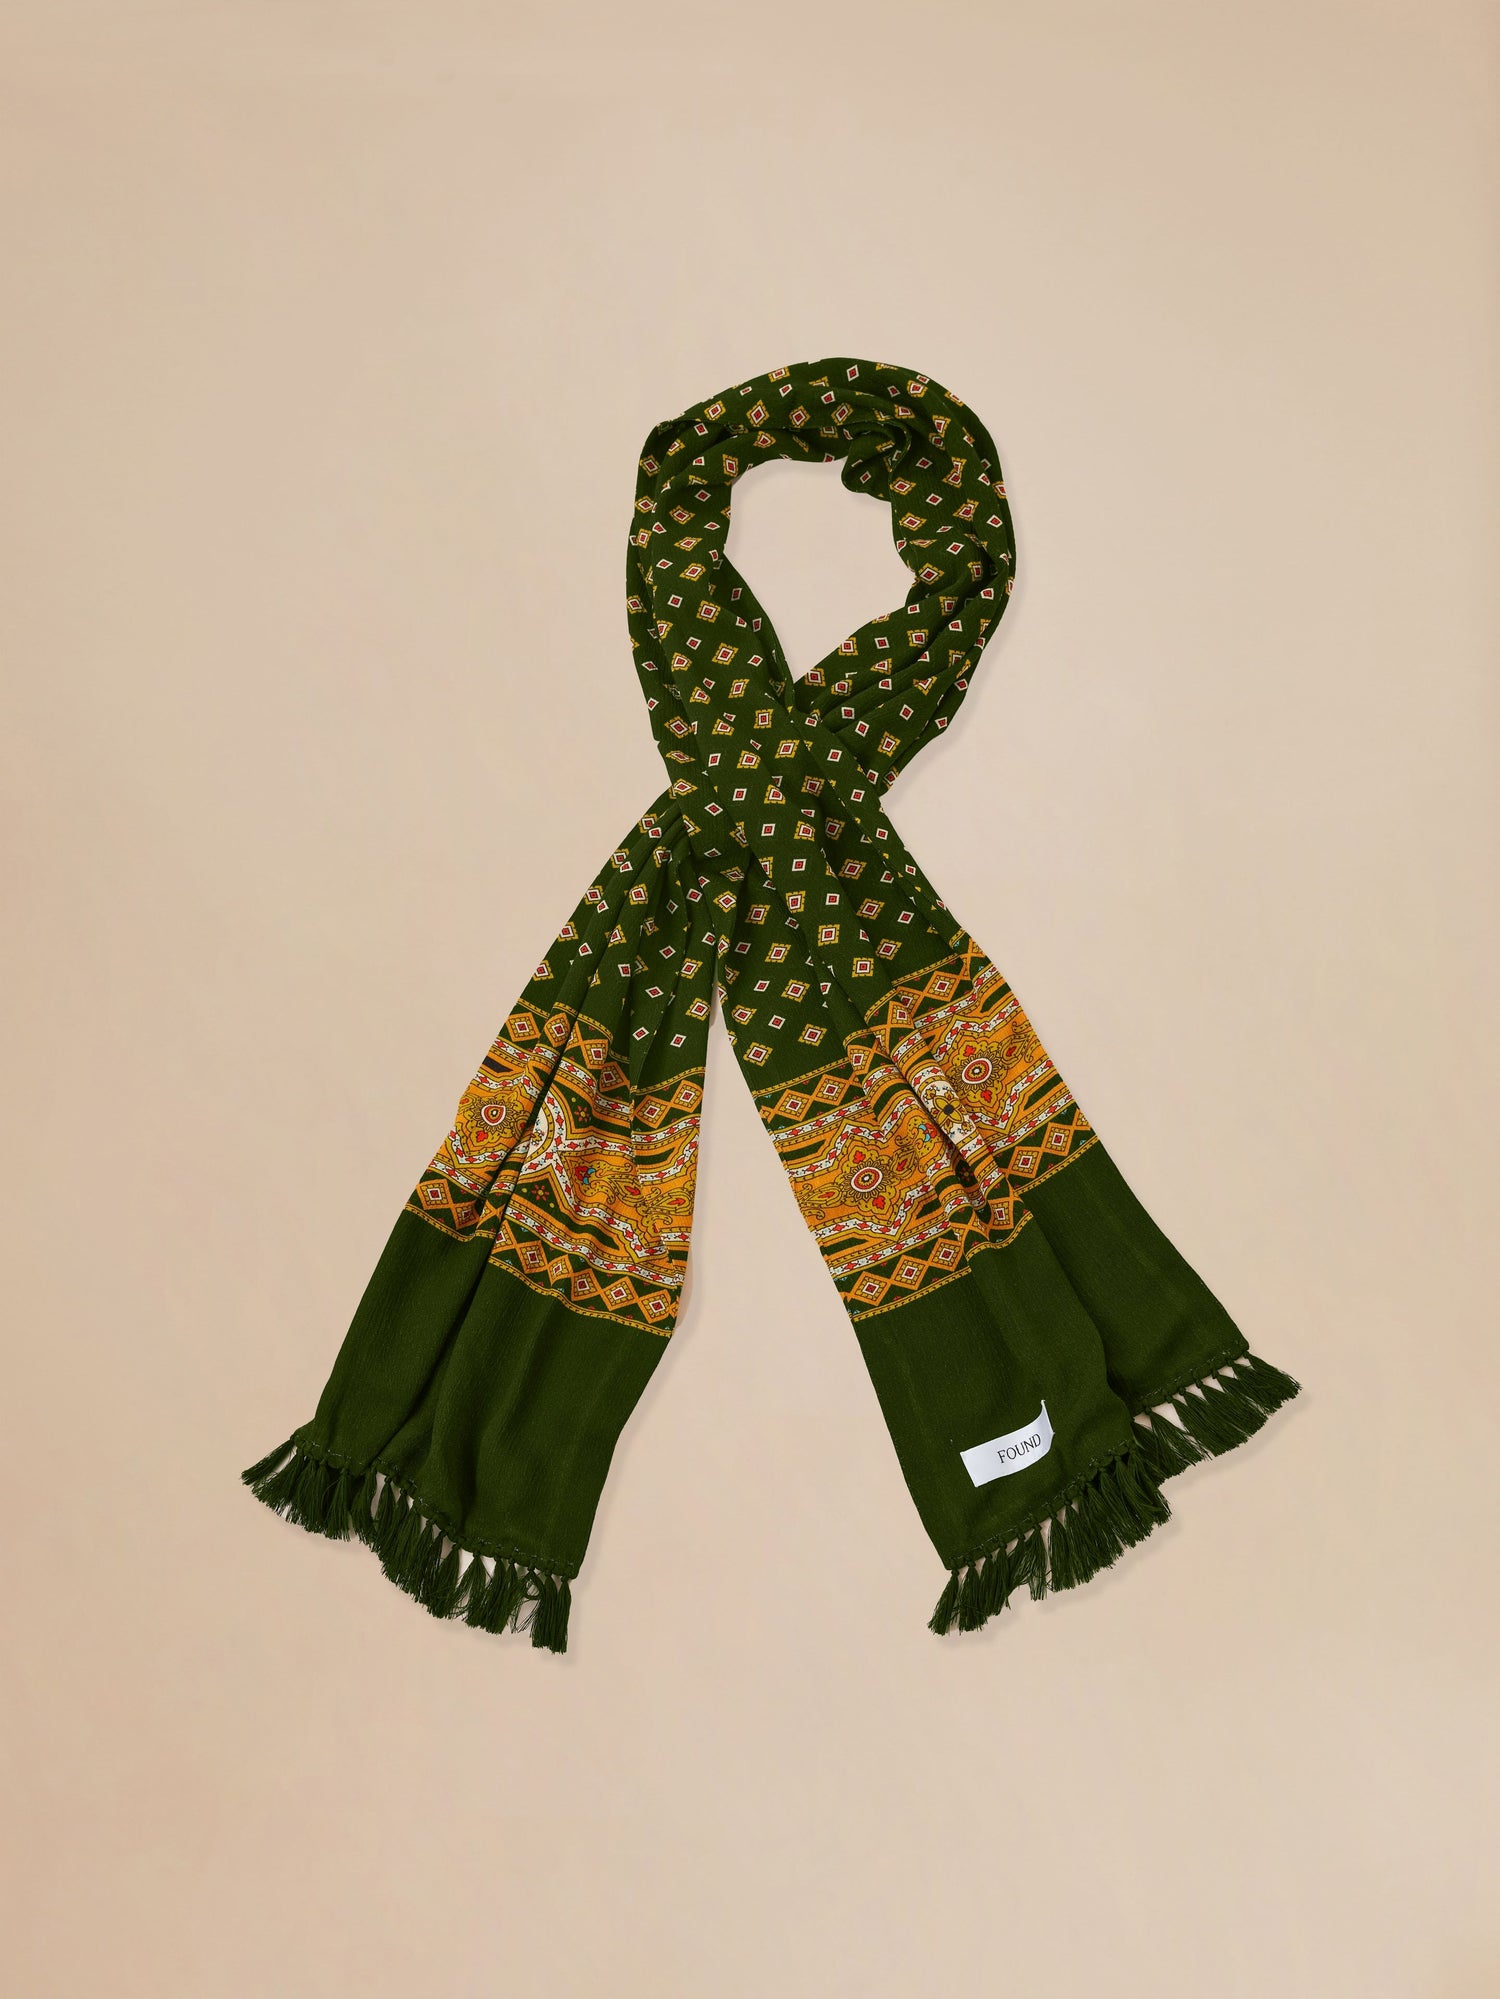 An Indo-Aryan Greener Pastures Scarf with tassels on a beige background by Found.